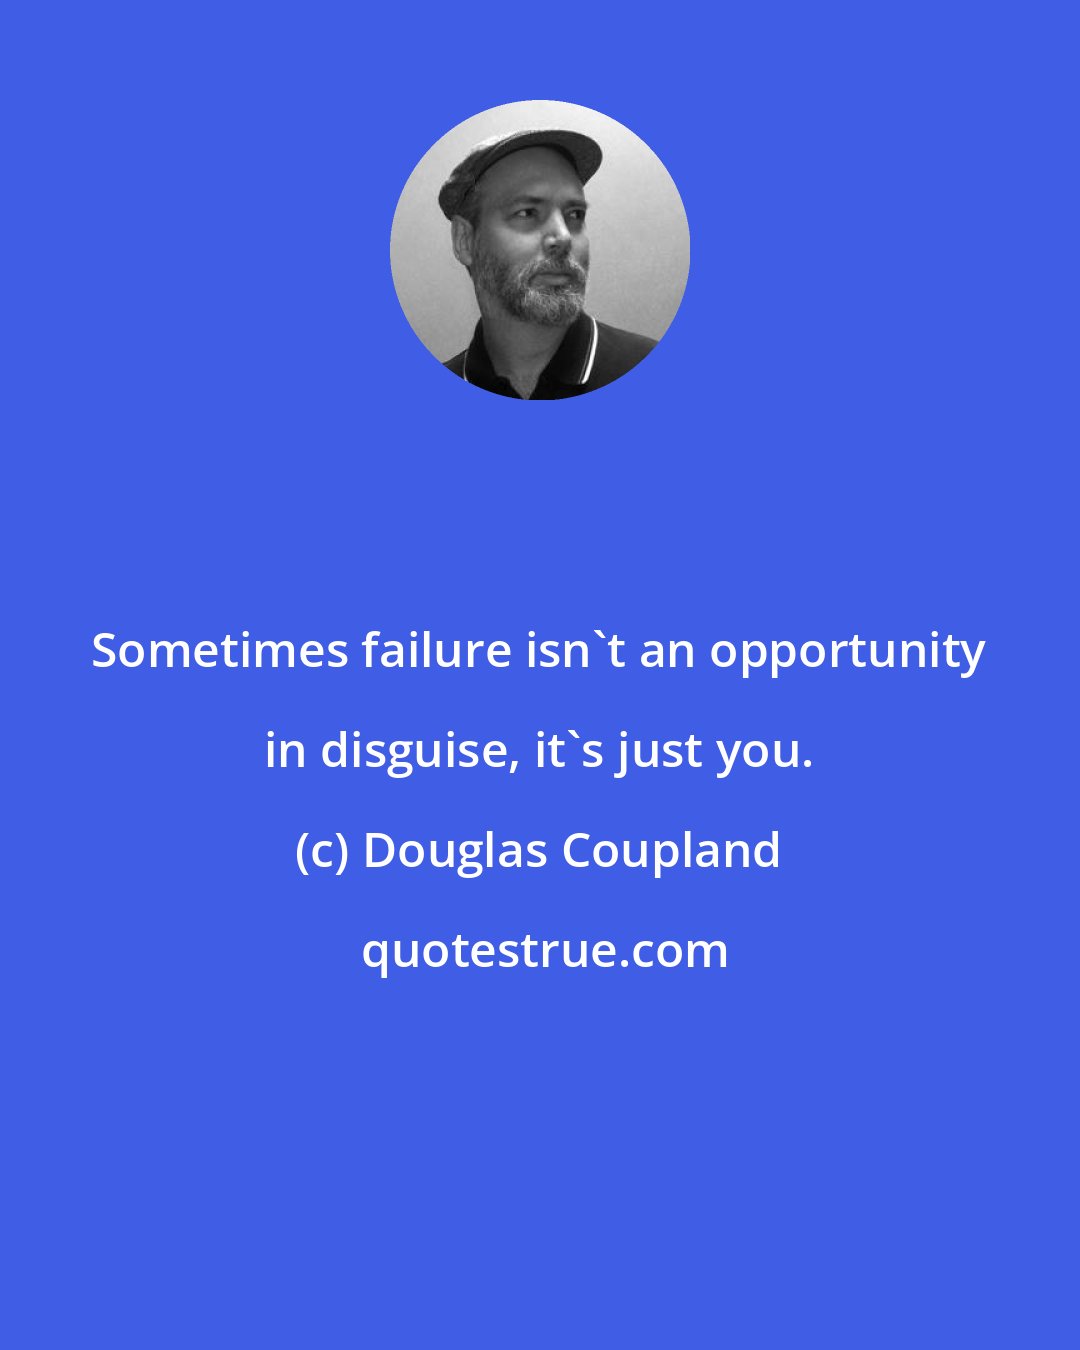 Douglas Coupland: Sometimes failure isn't an opportunity in disguise, it's just you.